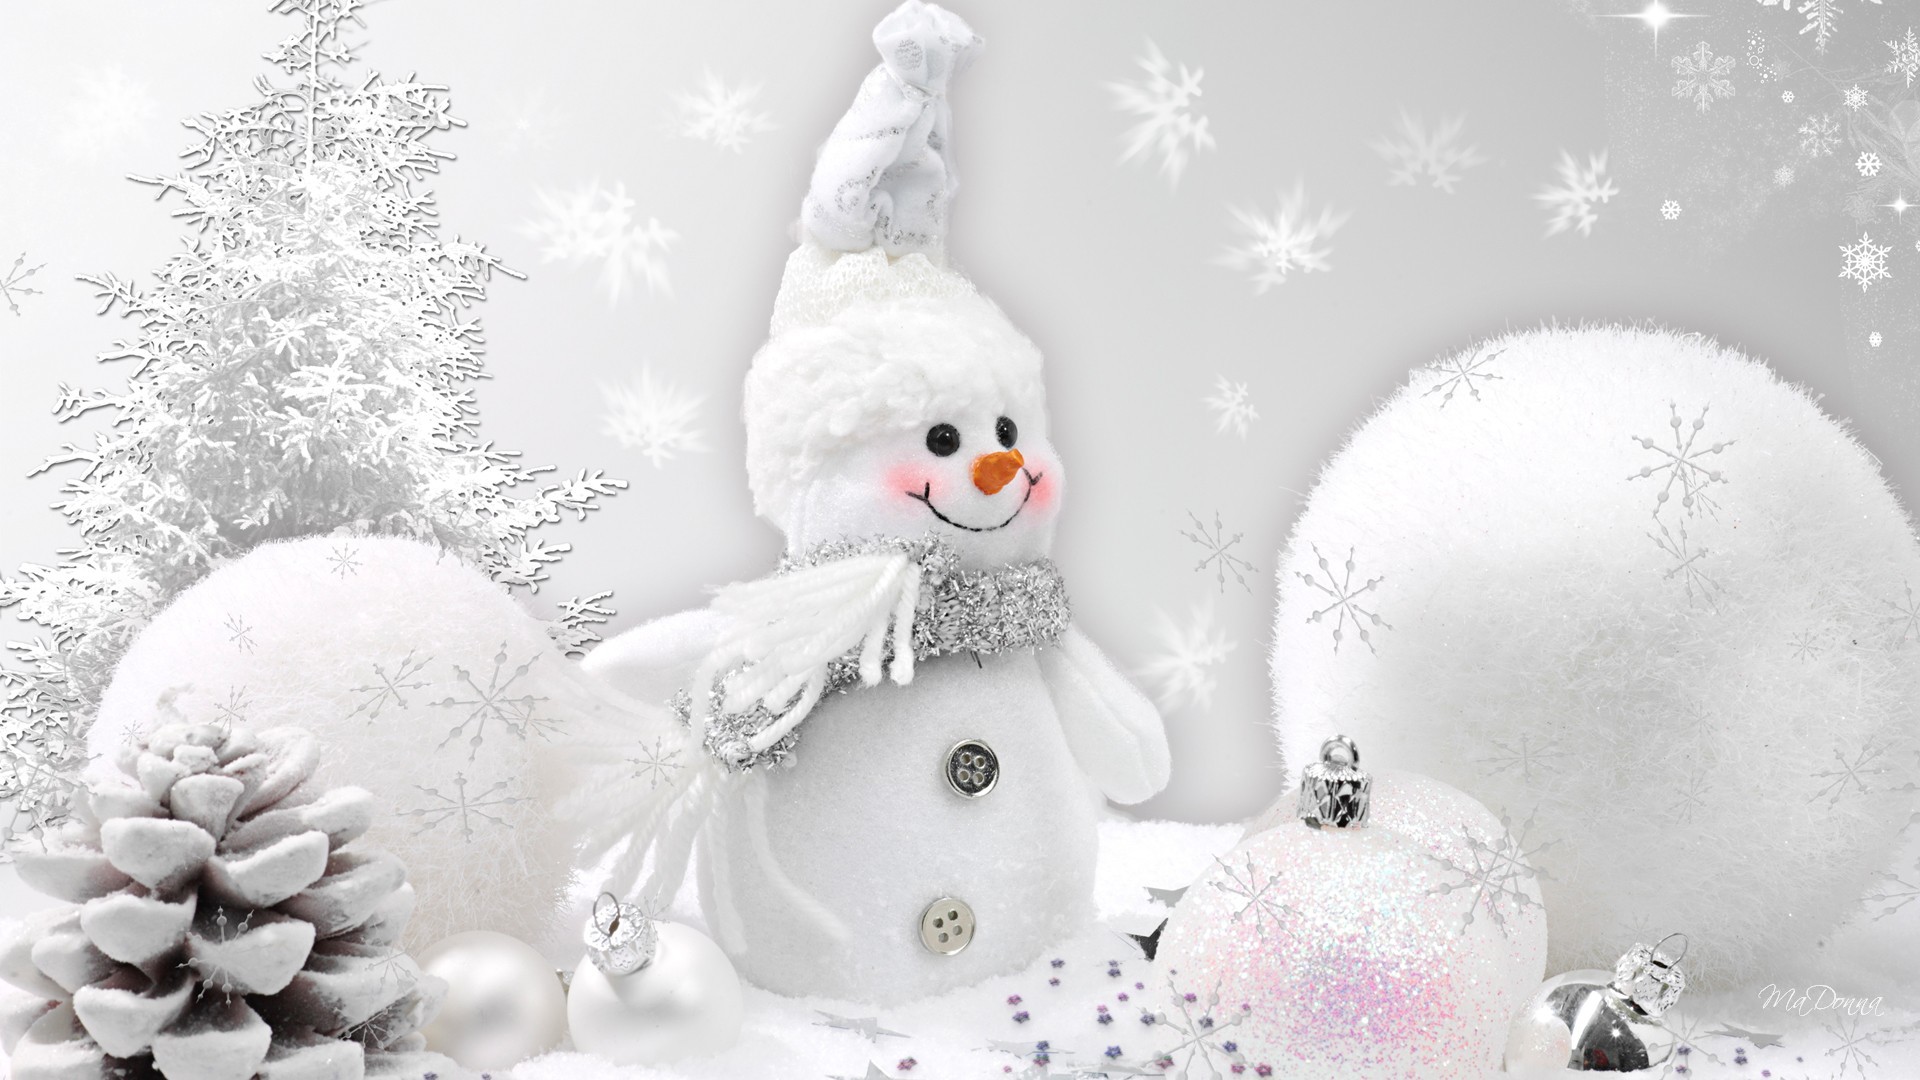 1920x1080 Christmas winter wallpaper pictures